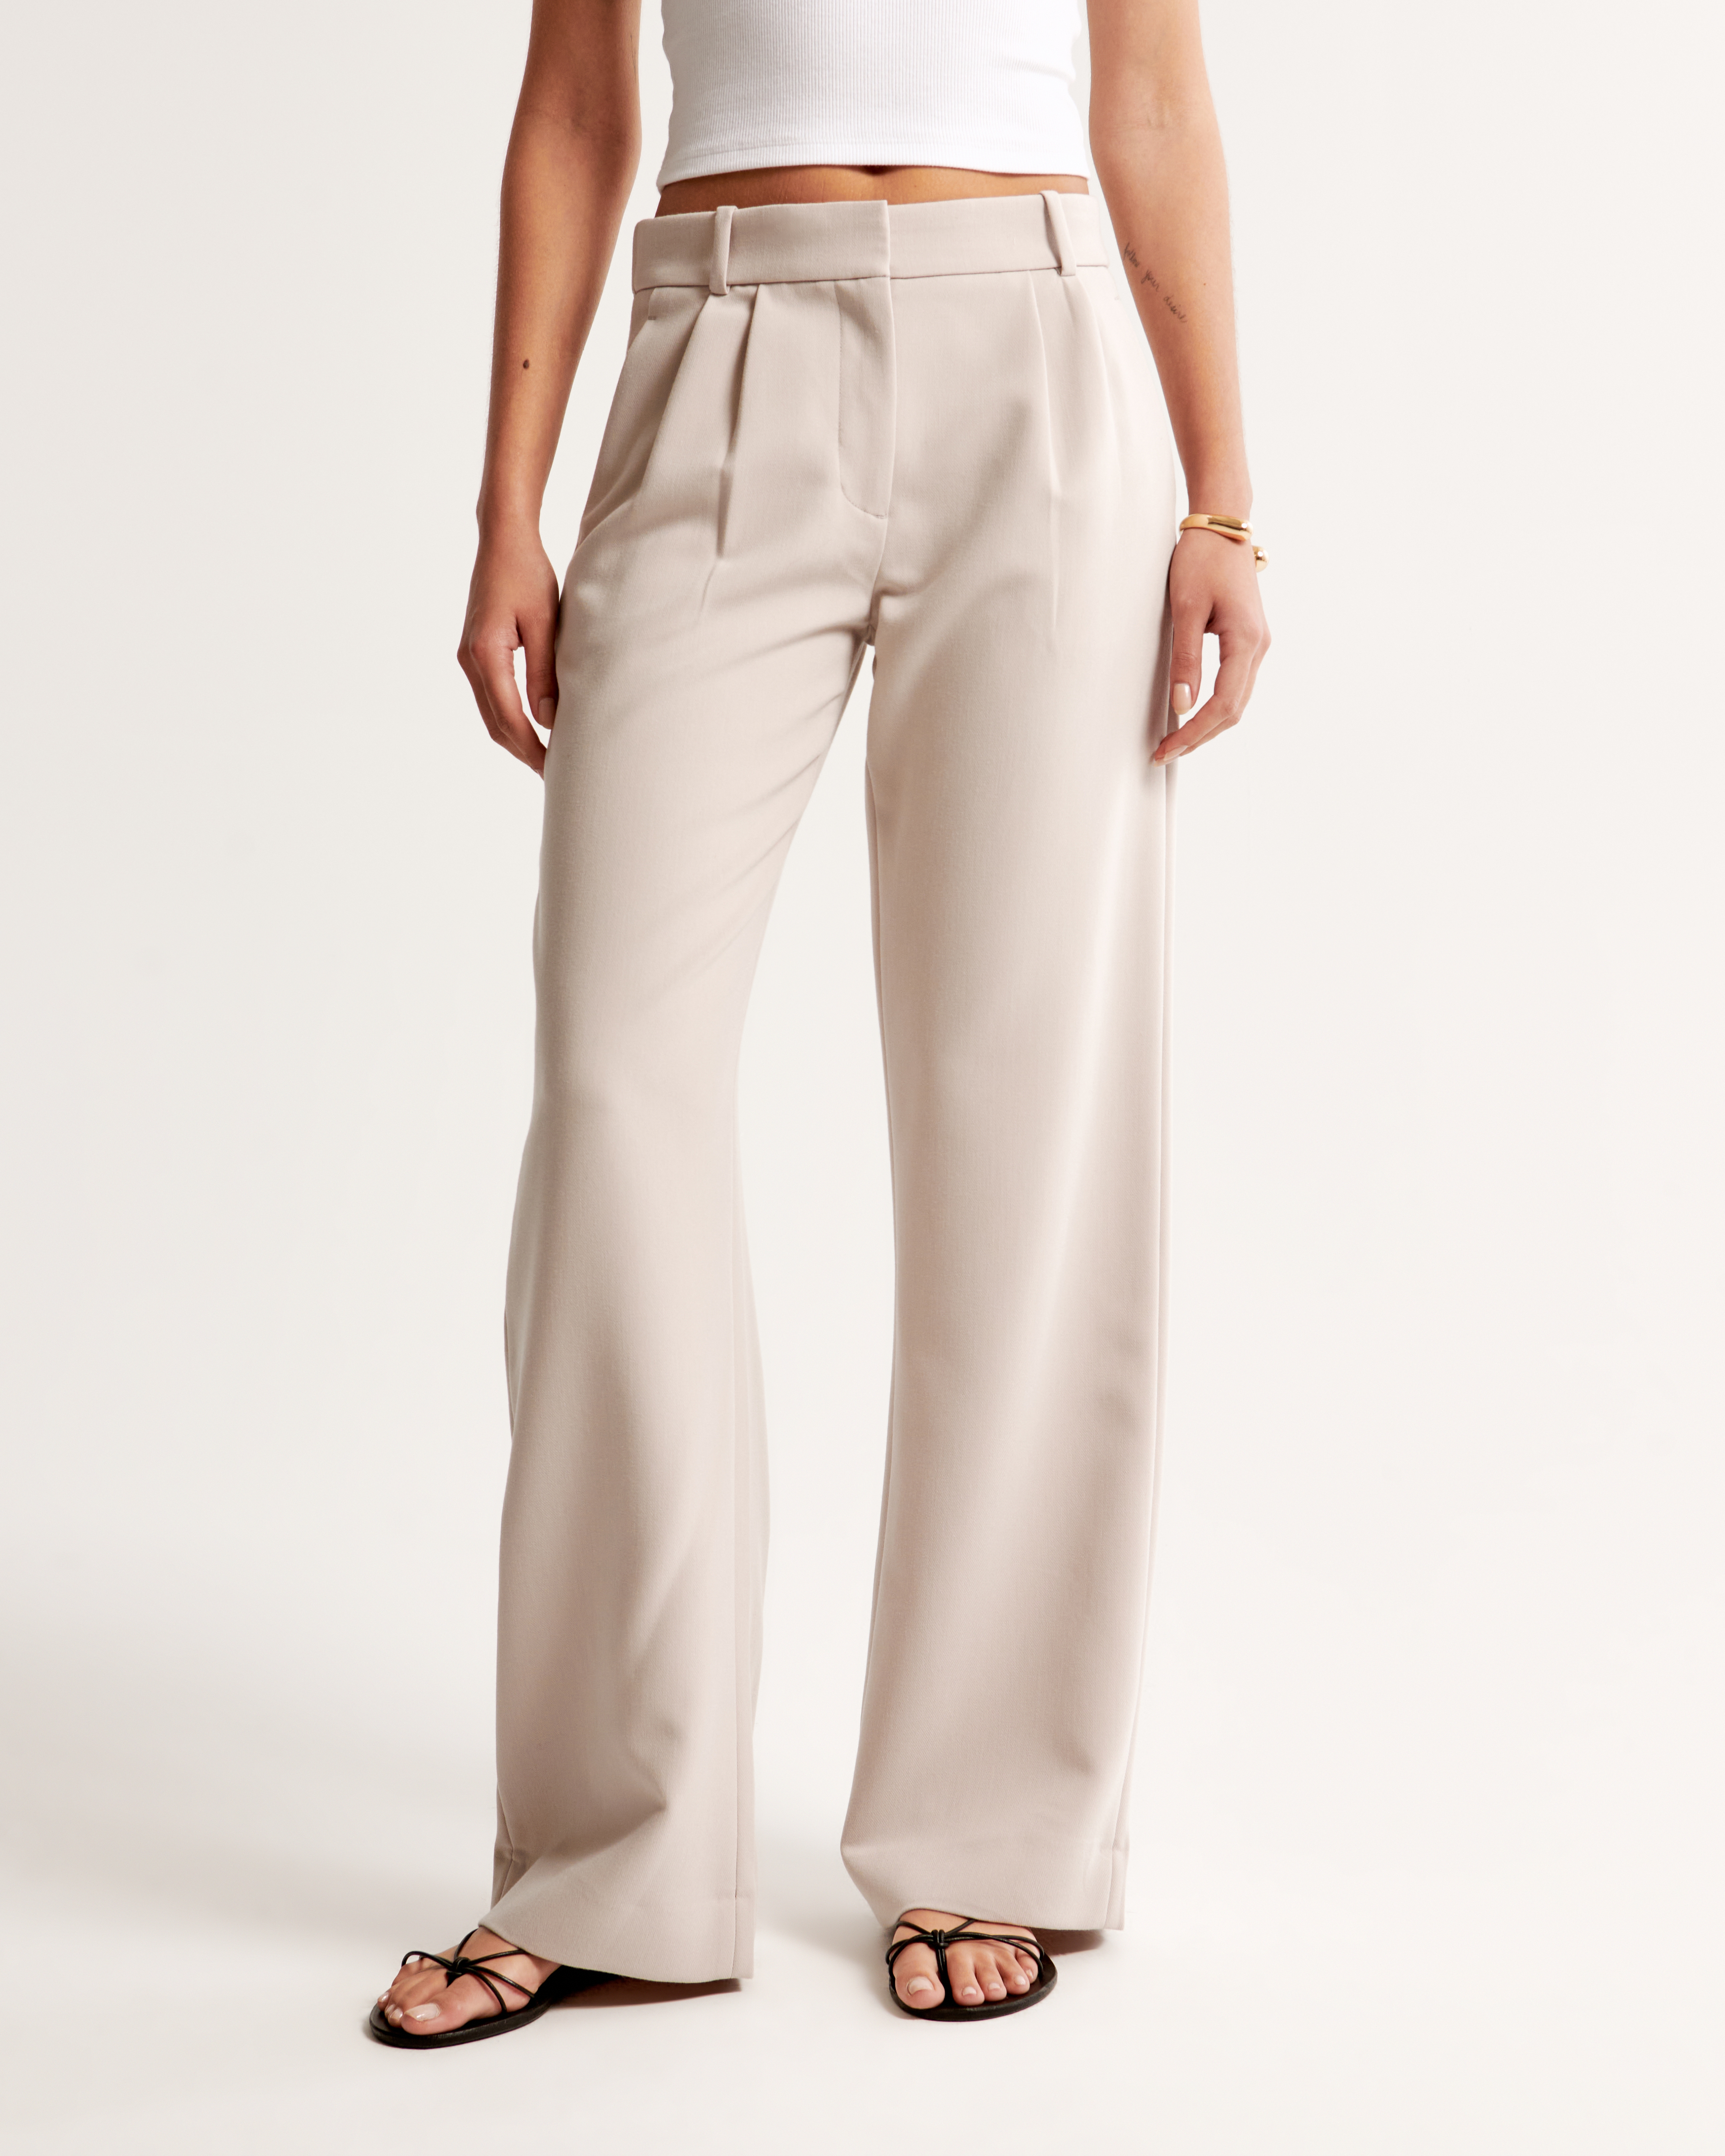 Women's A&F Sloane Low Rise Tailored Pant | Women's Bottoms